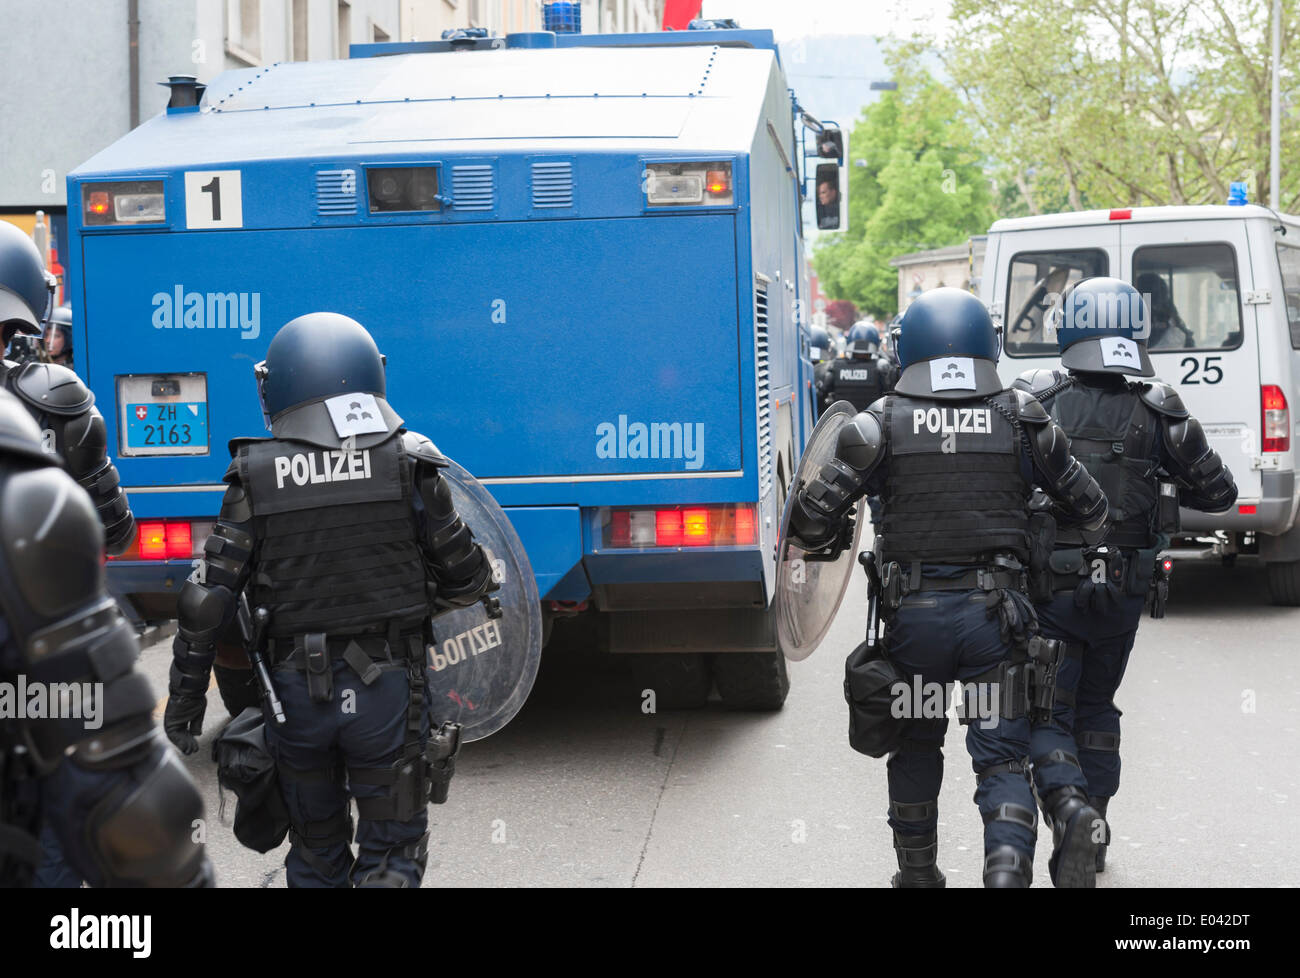 Zurich, Switzerland. 1st May, 2014. Armed police forces get ready ...